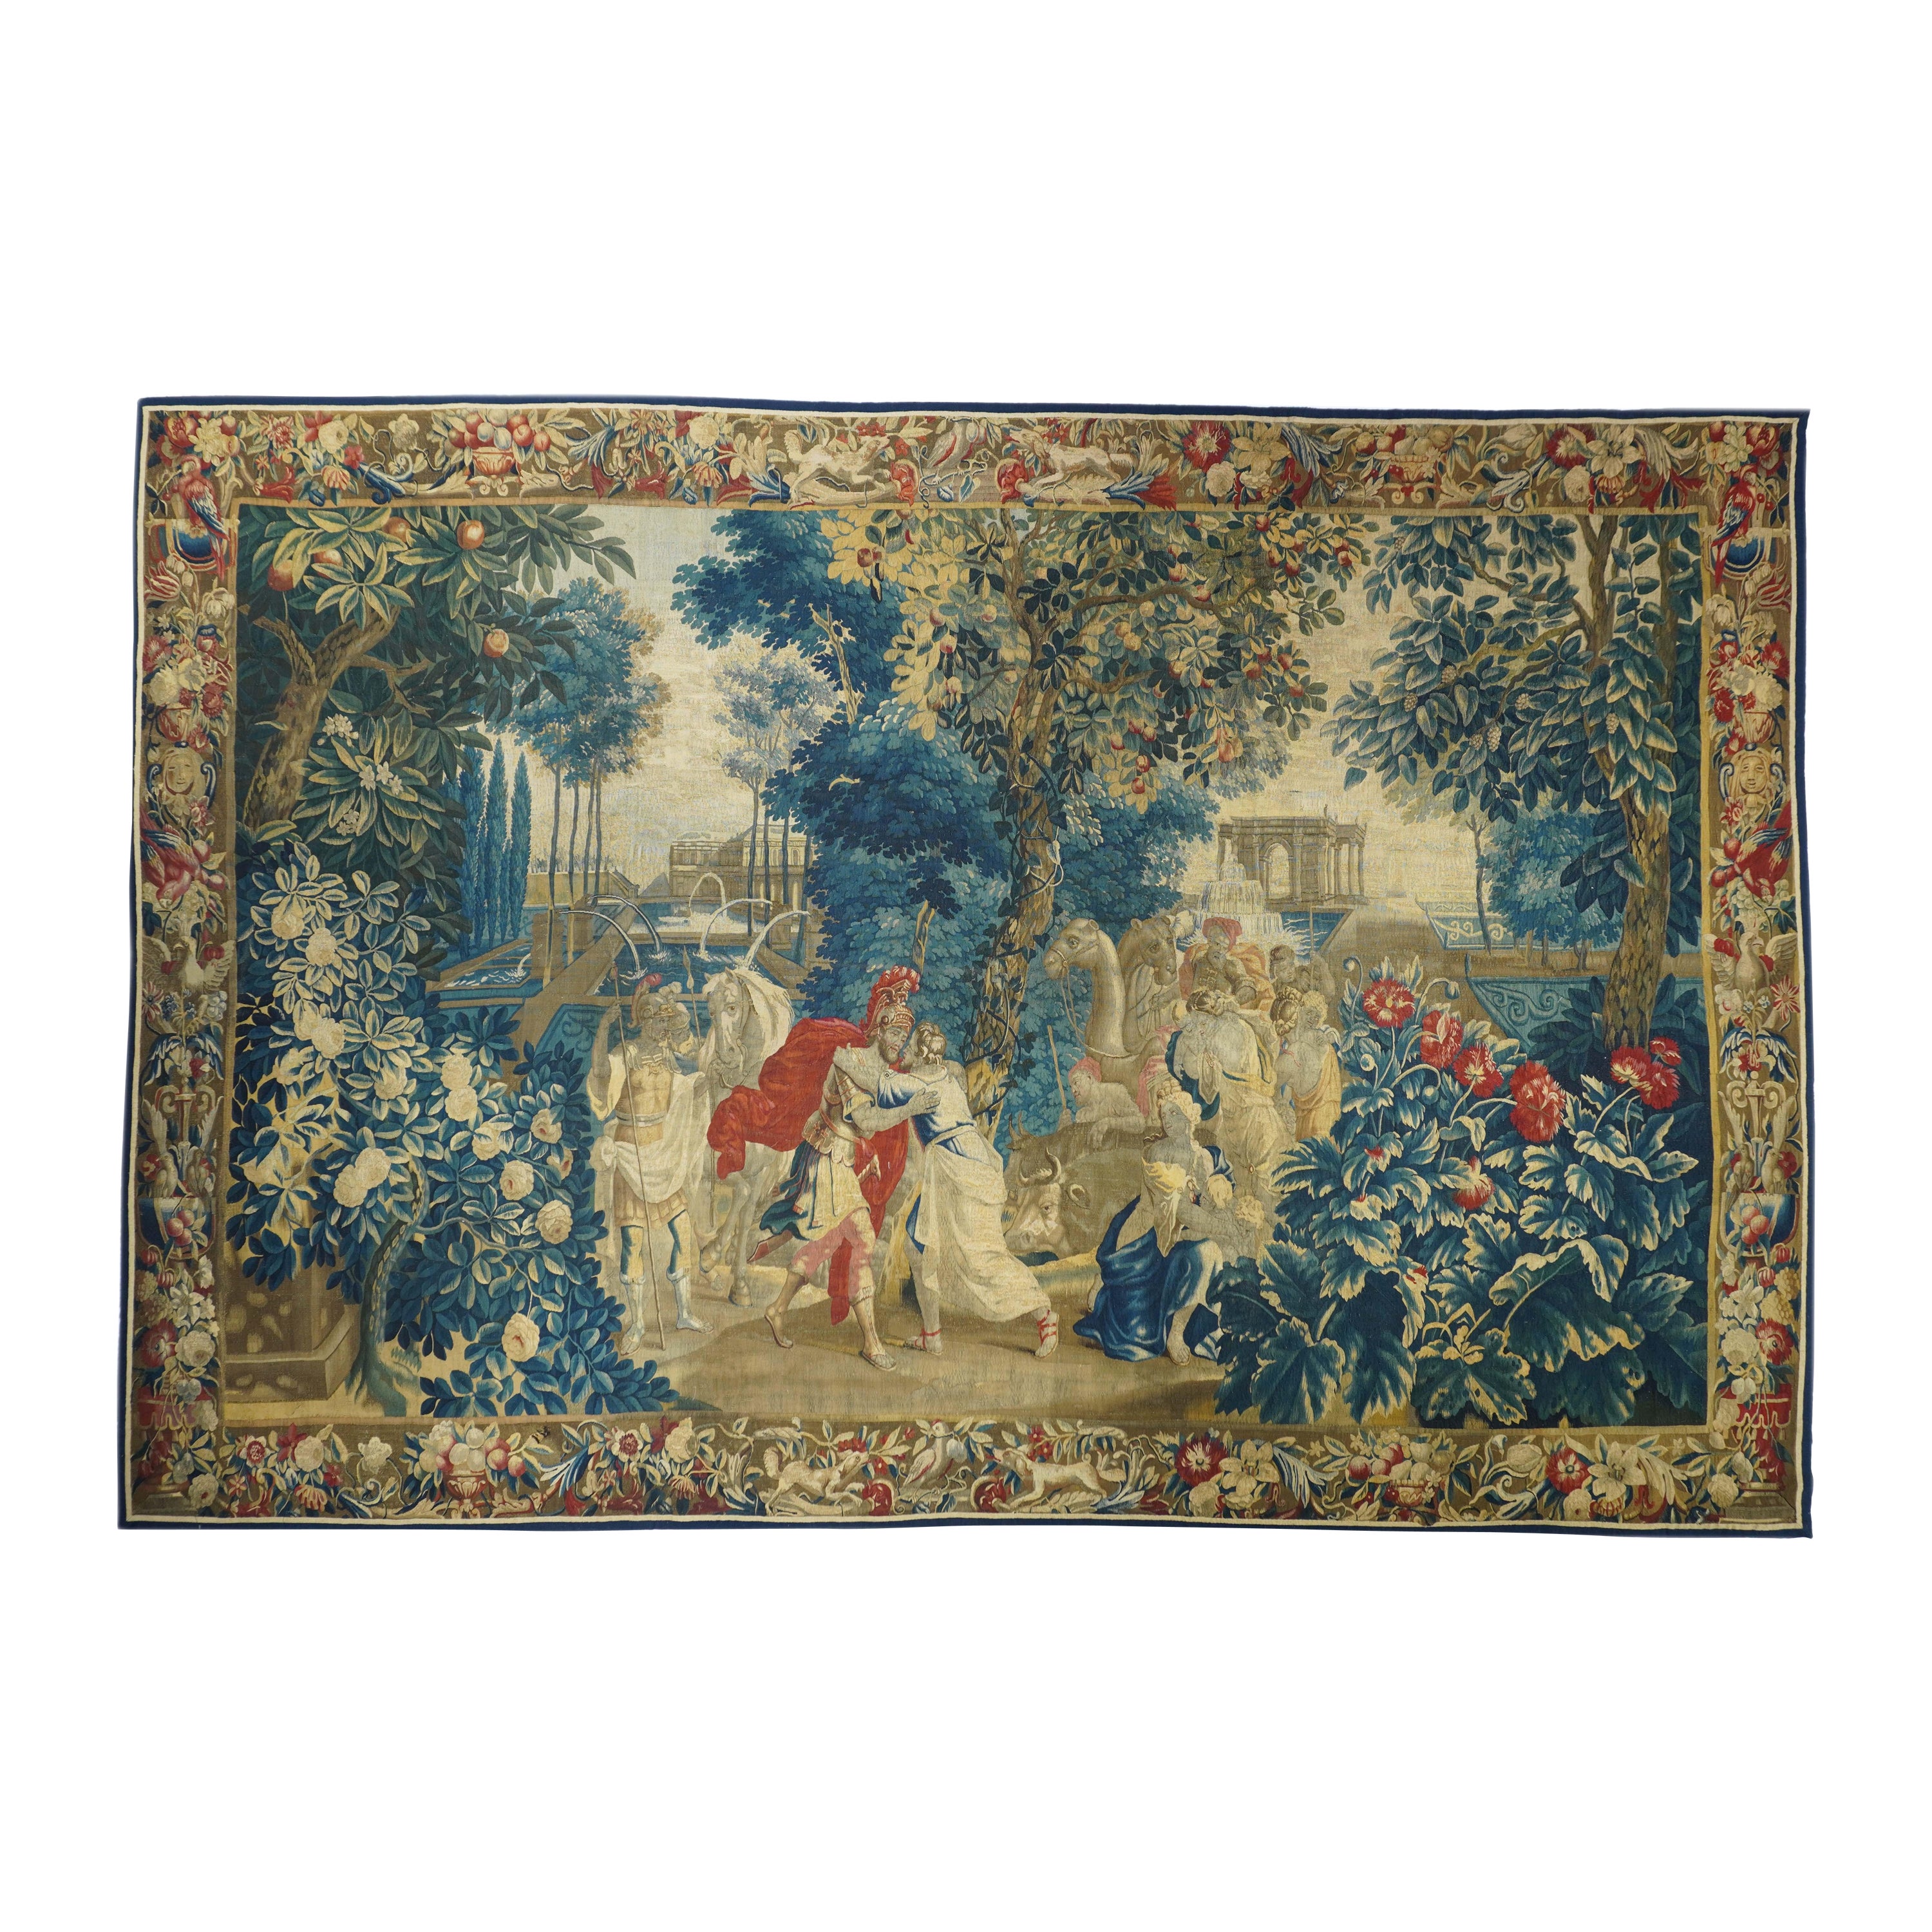 Brussel Tapestry "the Concord Siria by the Roman" 